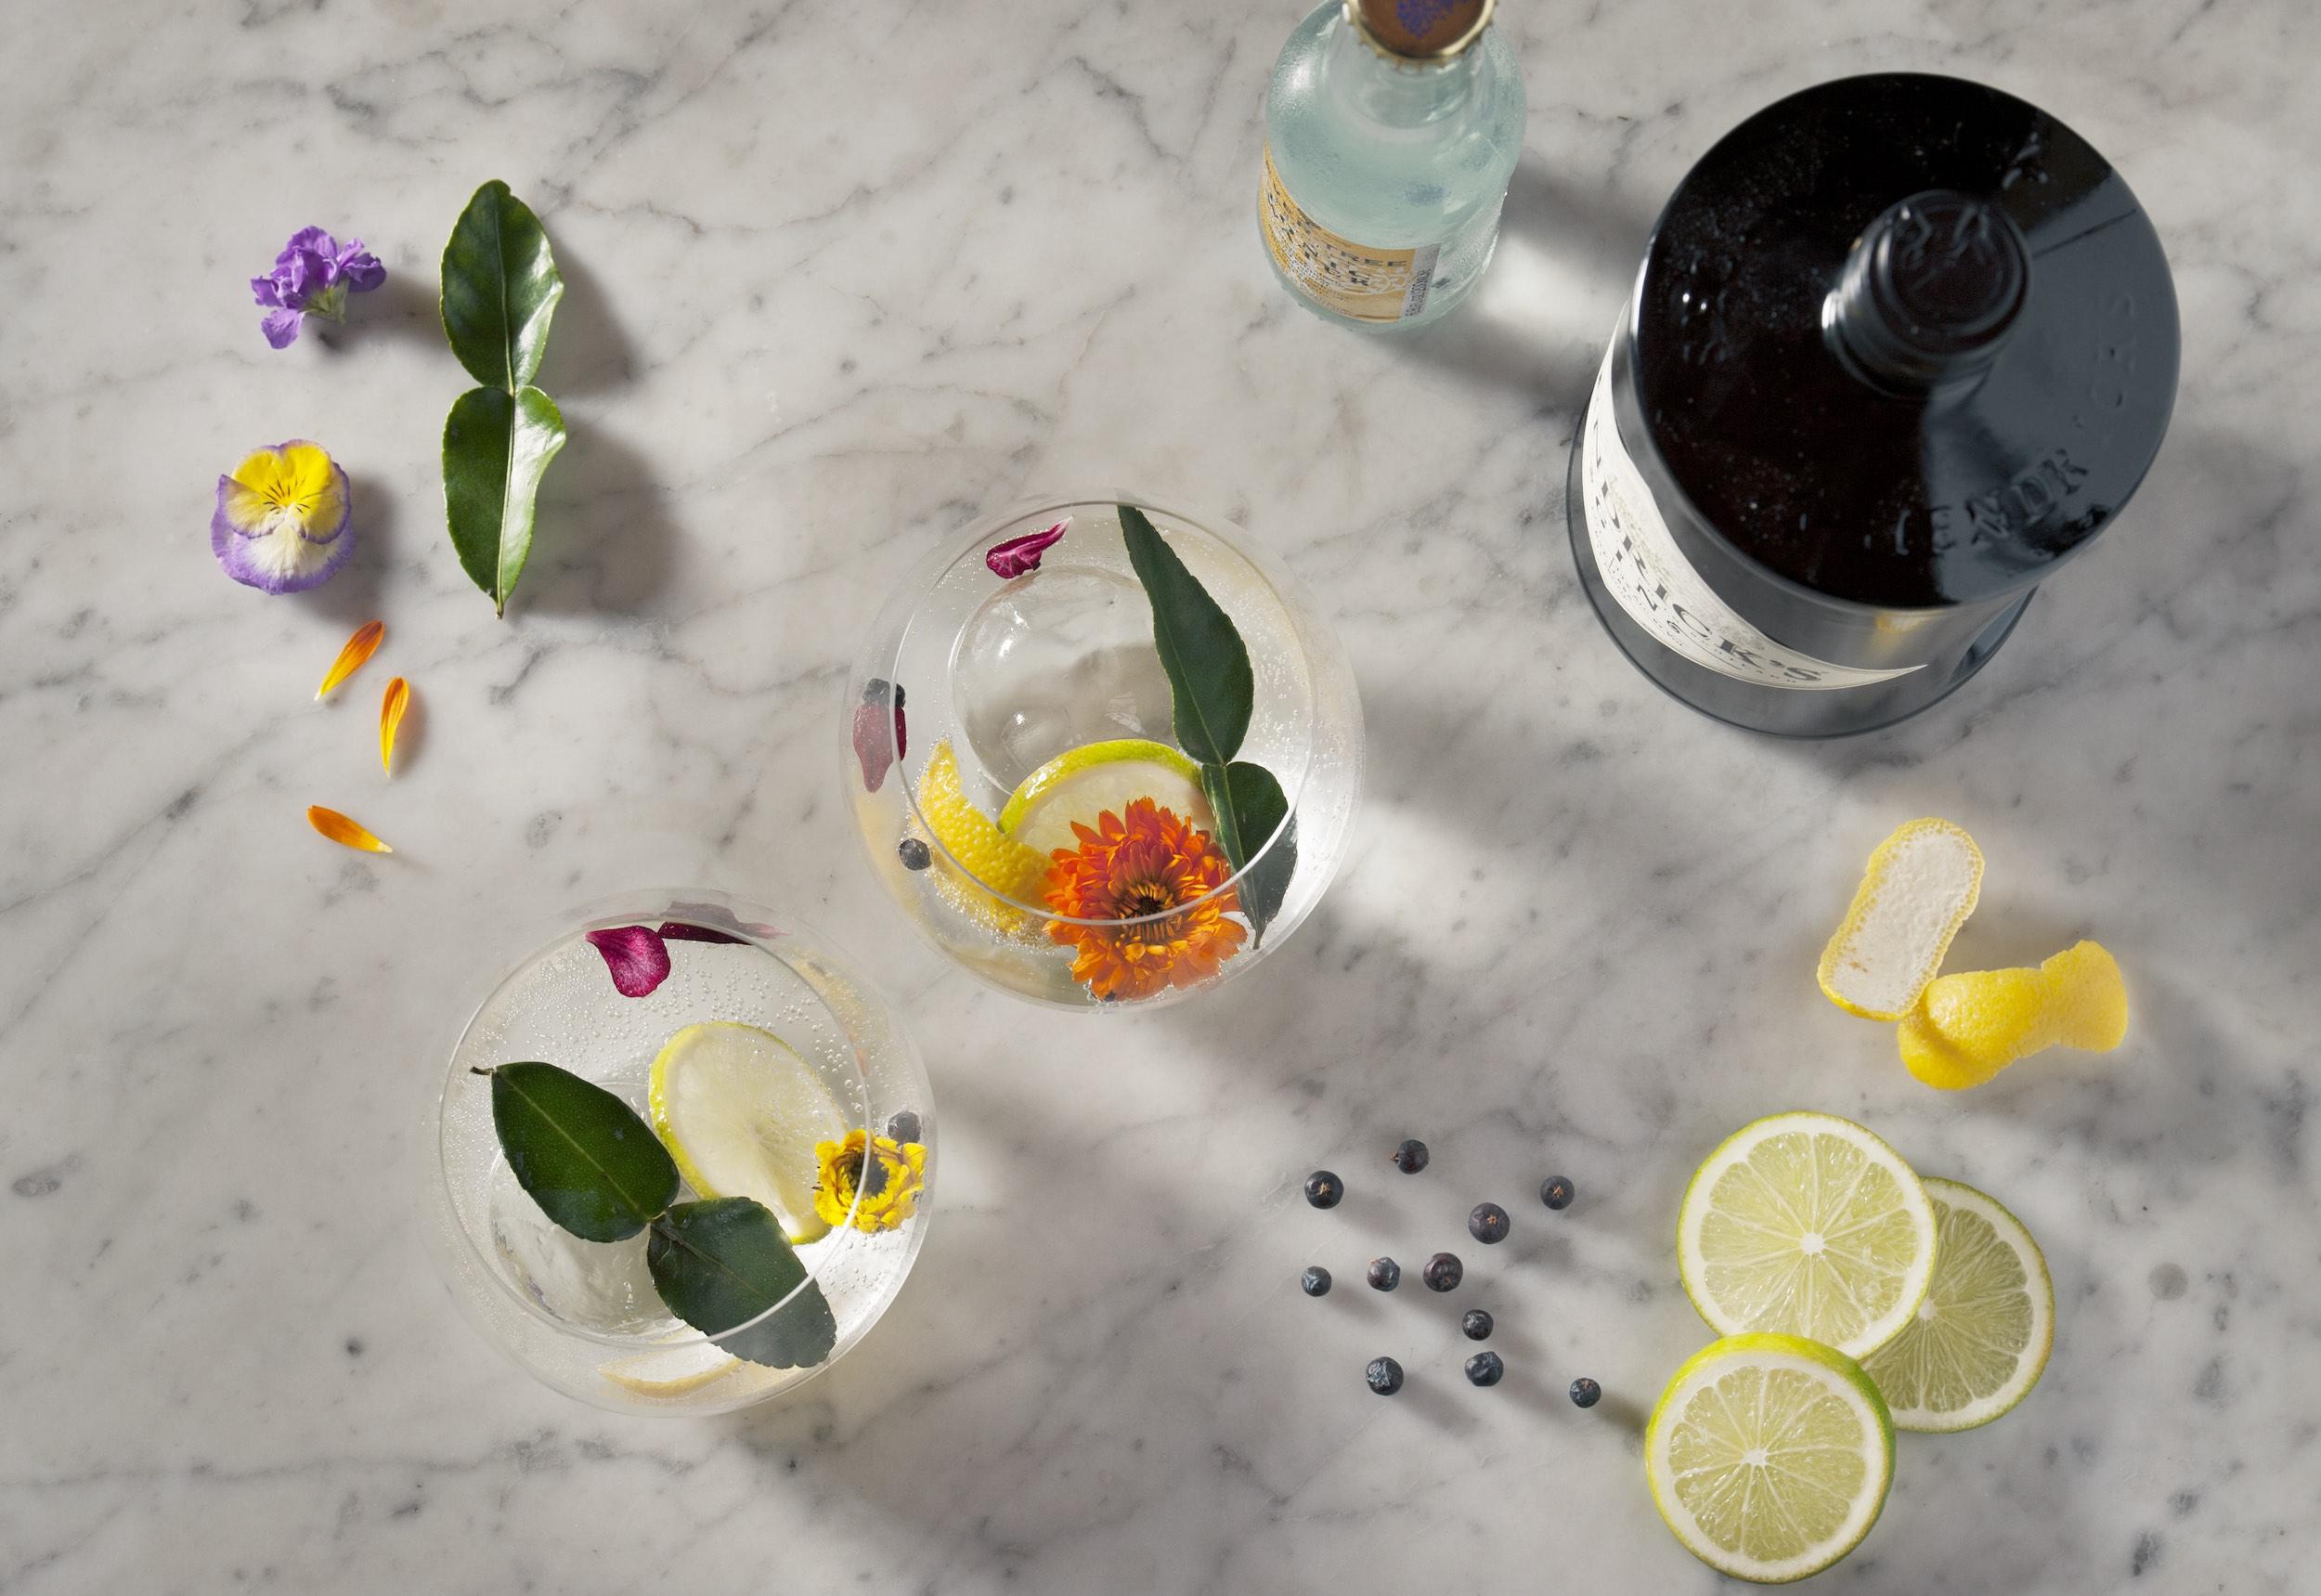 citrus, flowers and ingredients for a gin and tonic